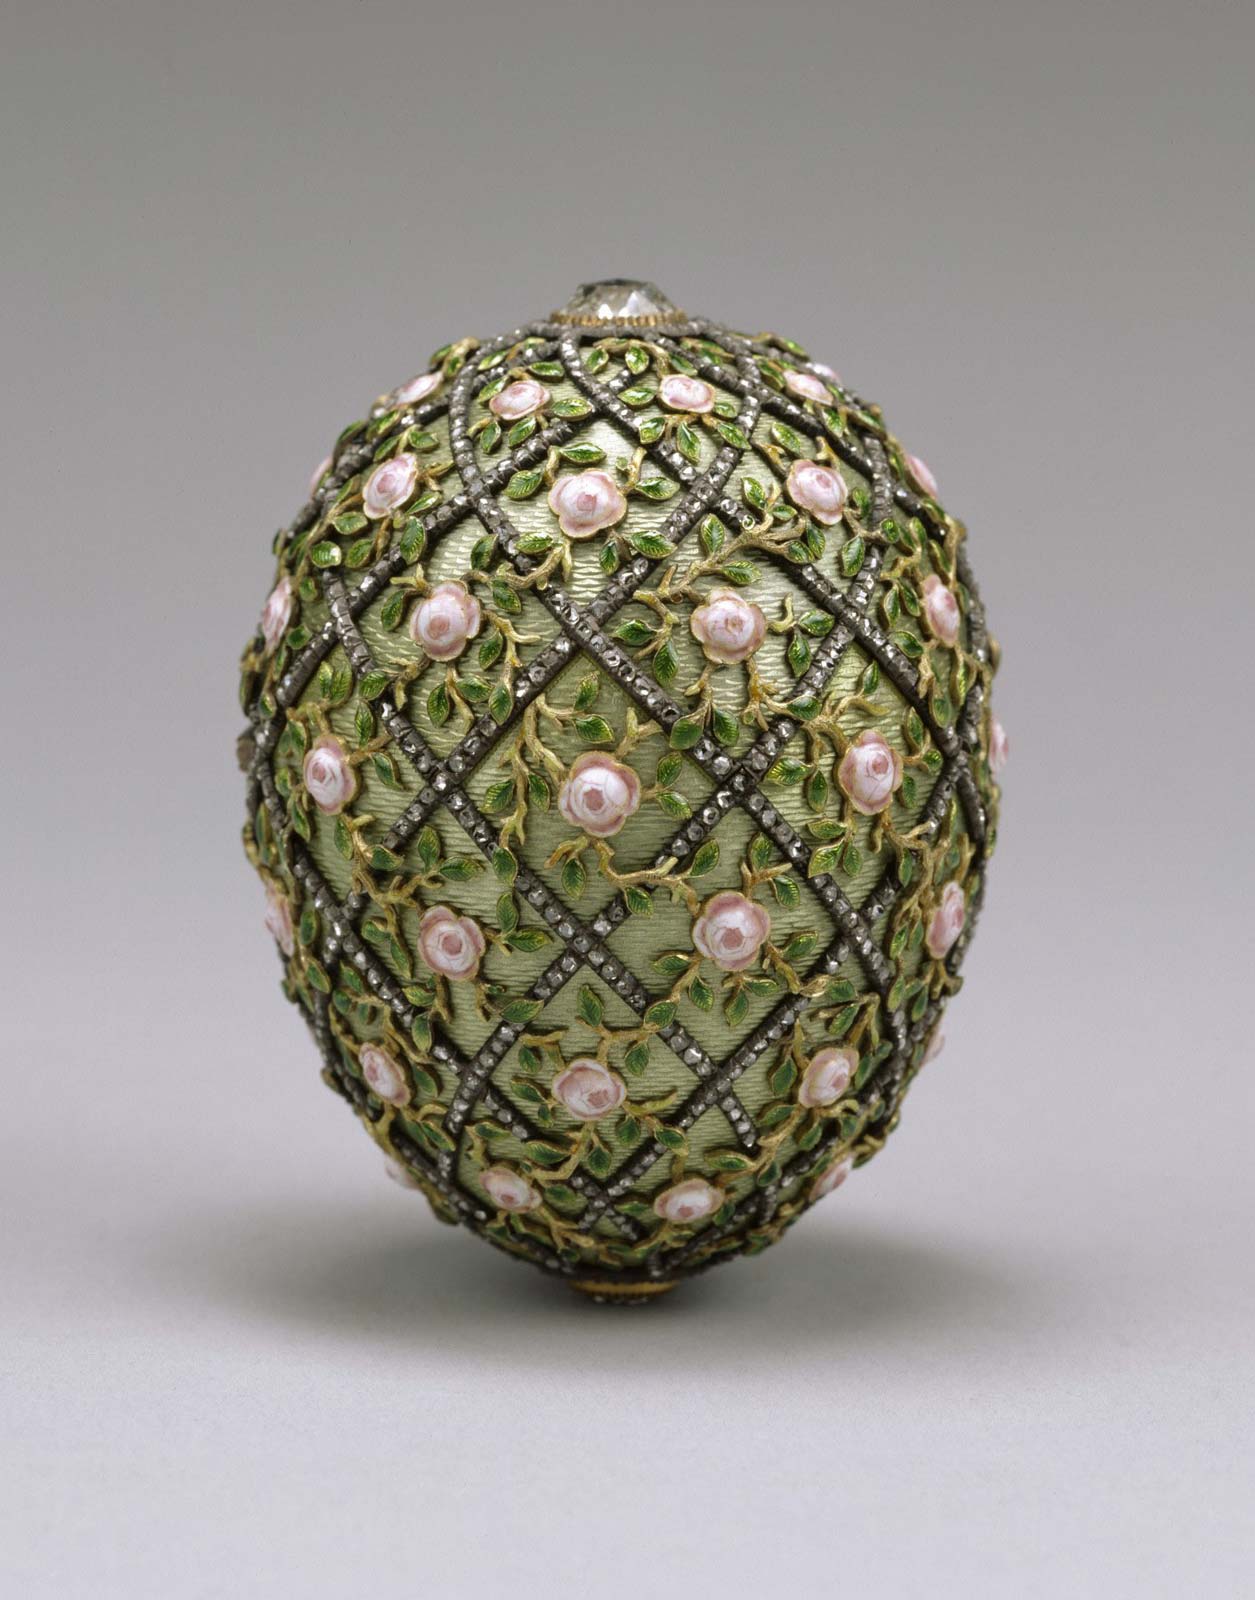 Faberge Easter Gifts: The Perfect Jewelry